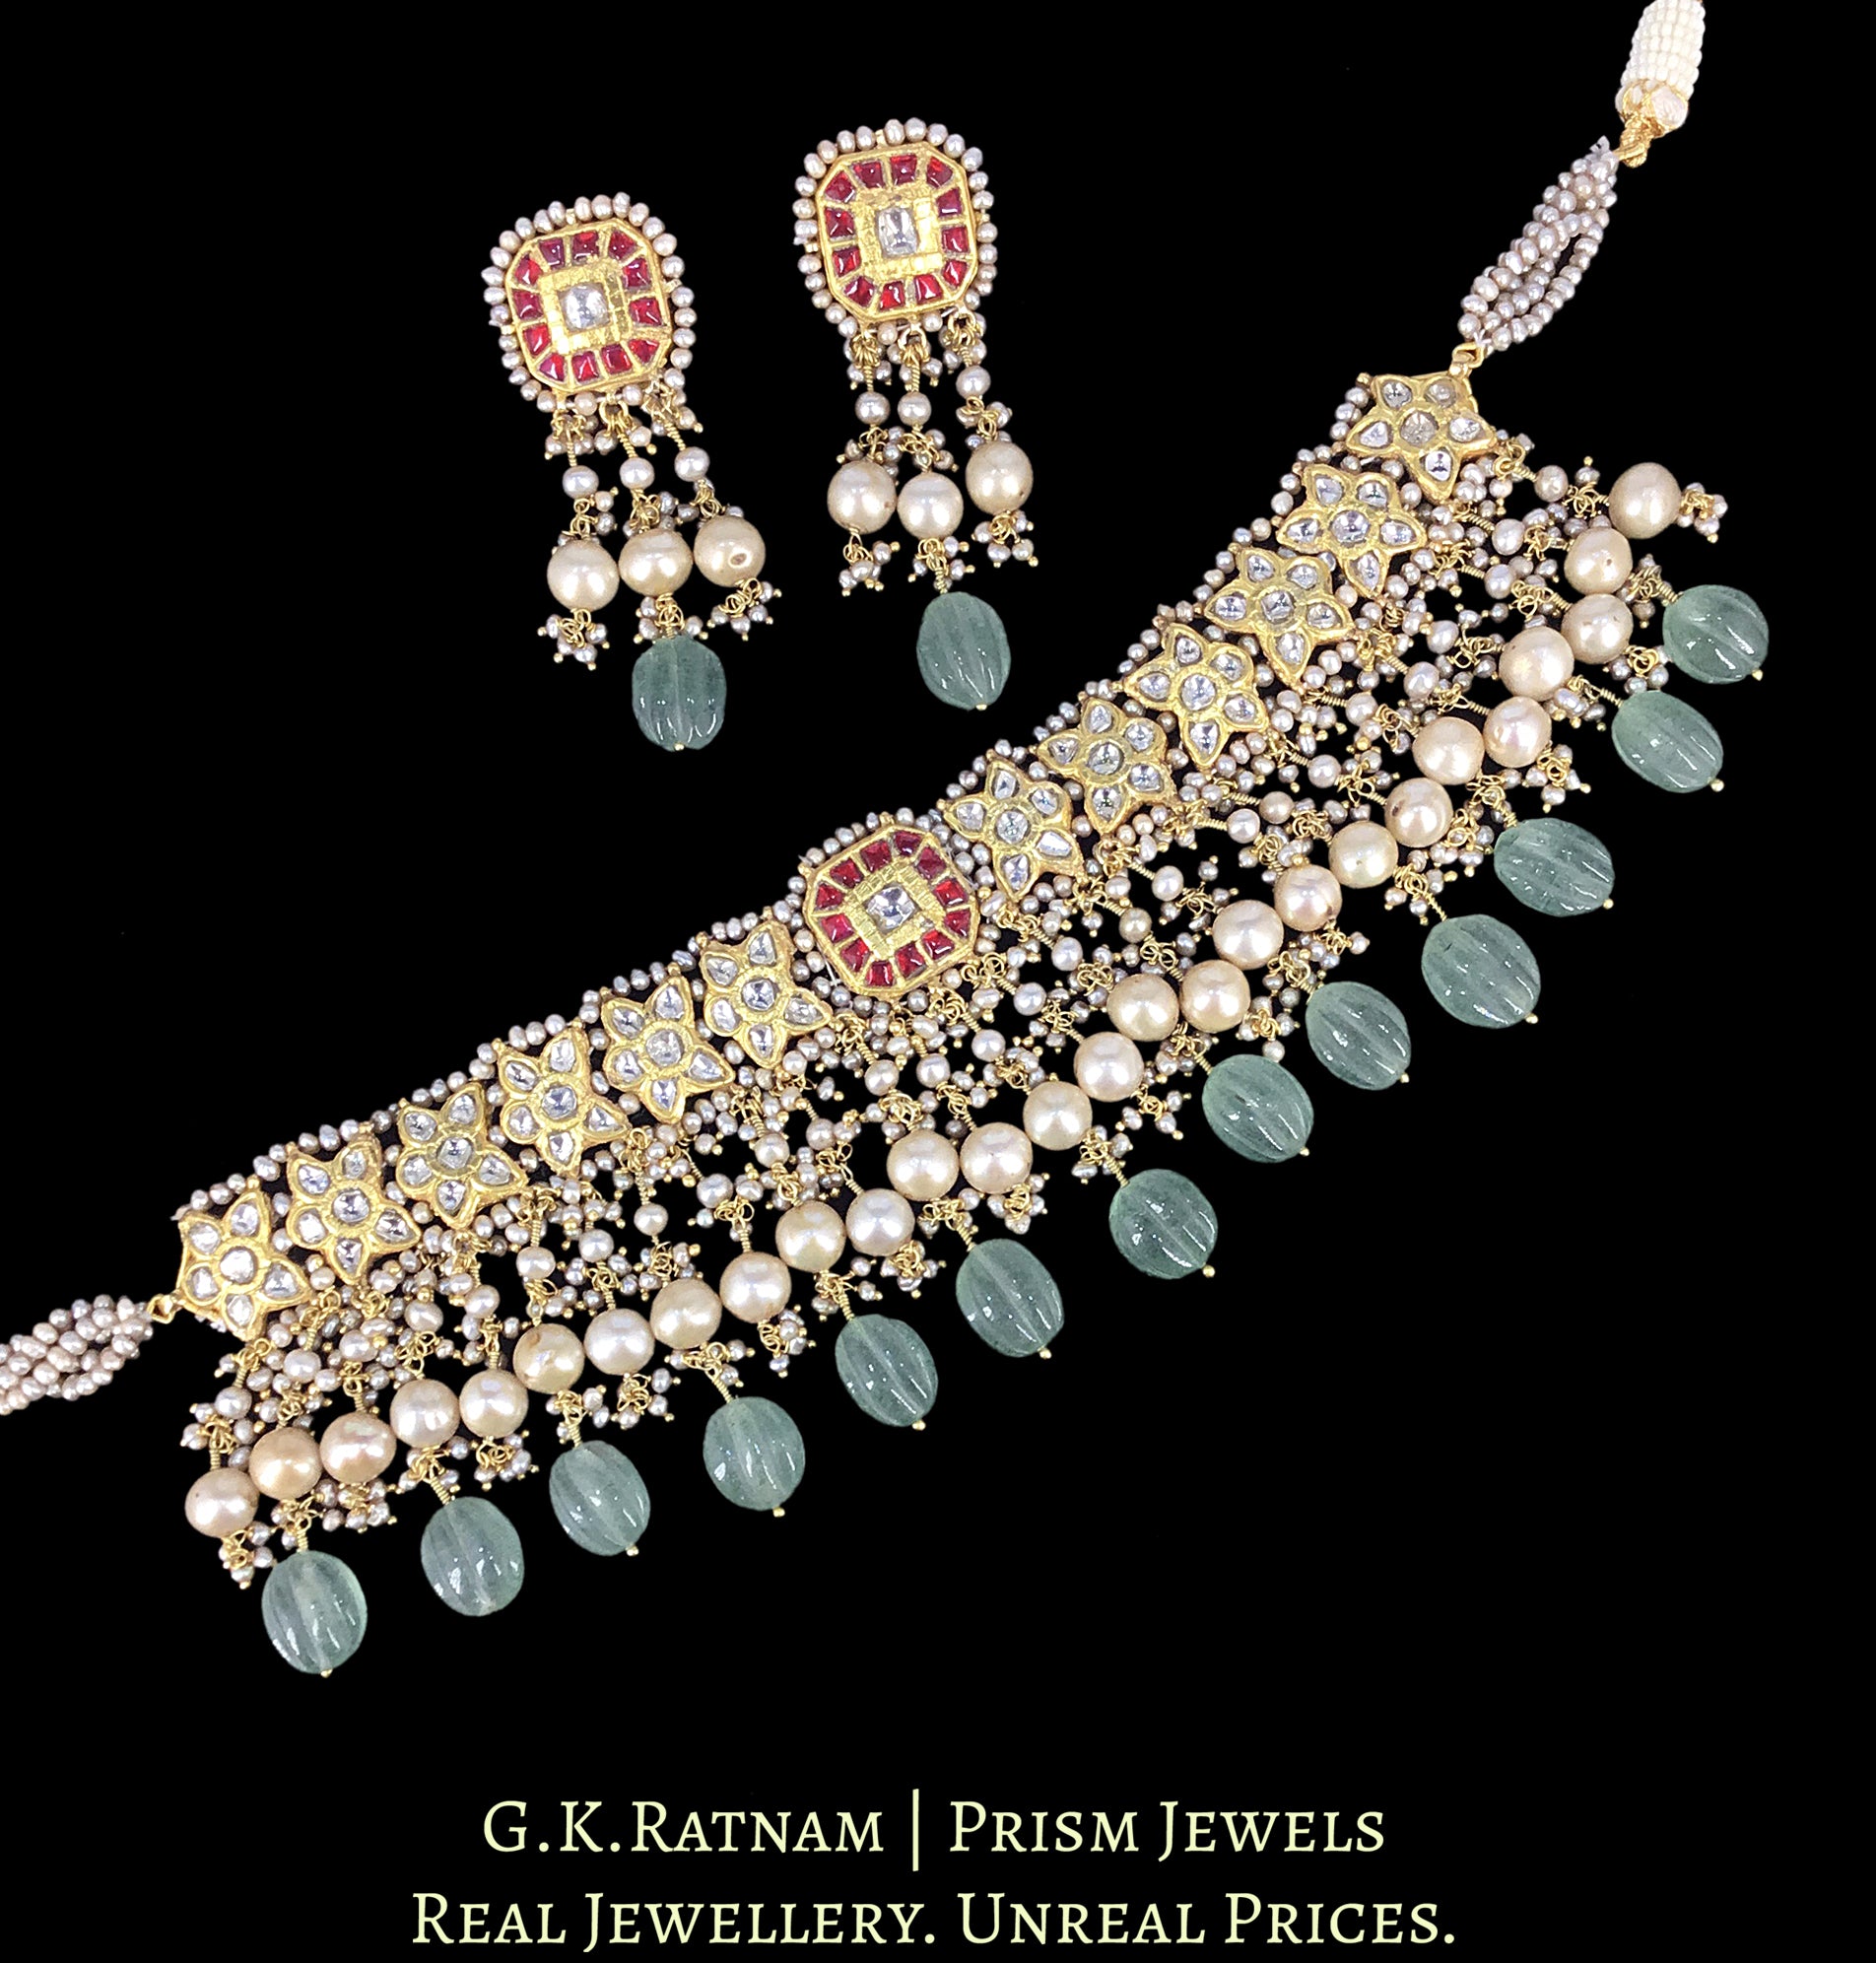 23k Gold and Diamond Polki Choker Necklace Set enhanced with Antiqued Freshwater Pearls and Green Strawberry Quartz Melons